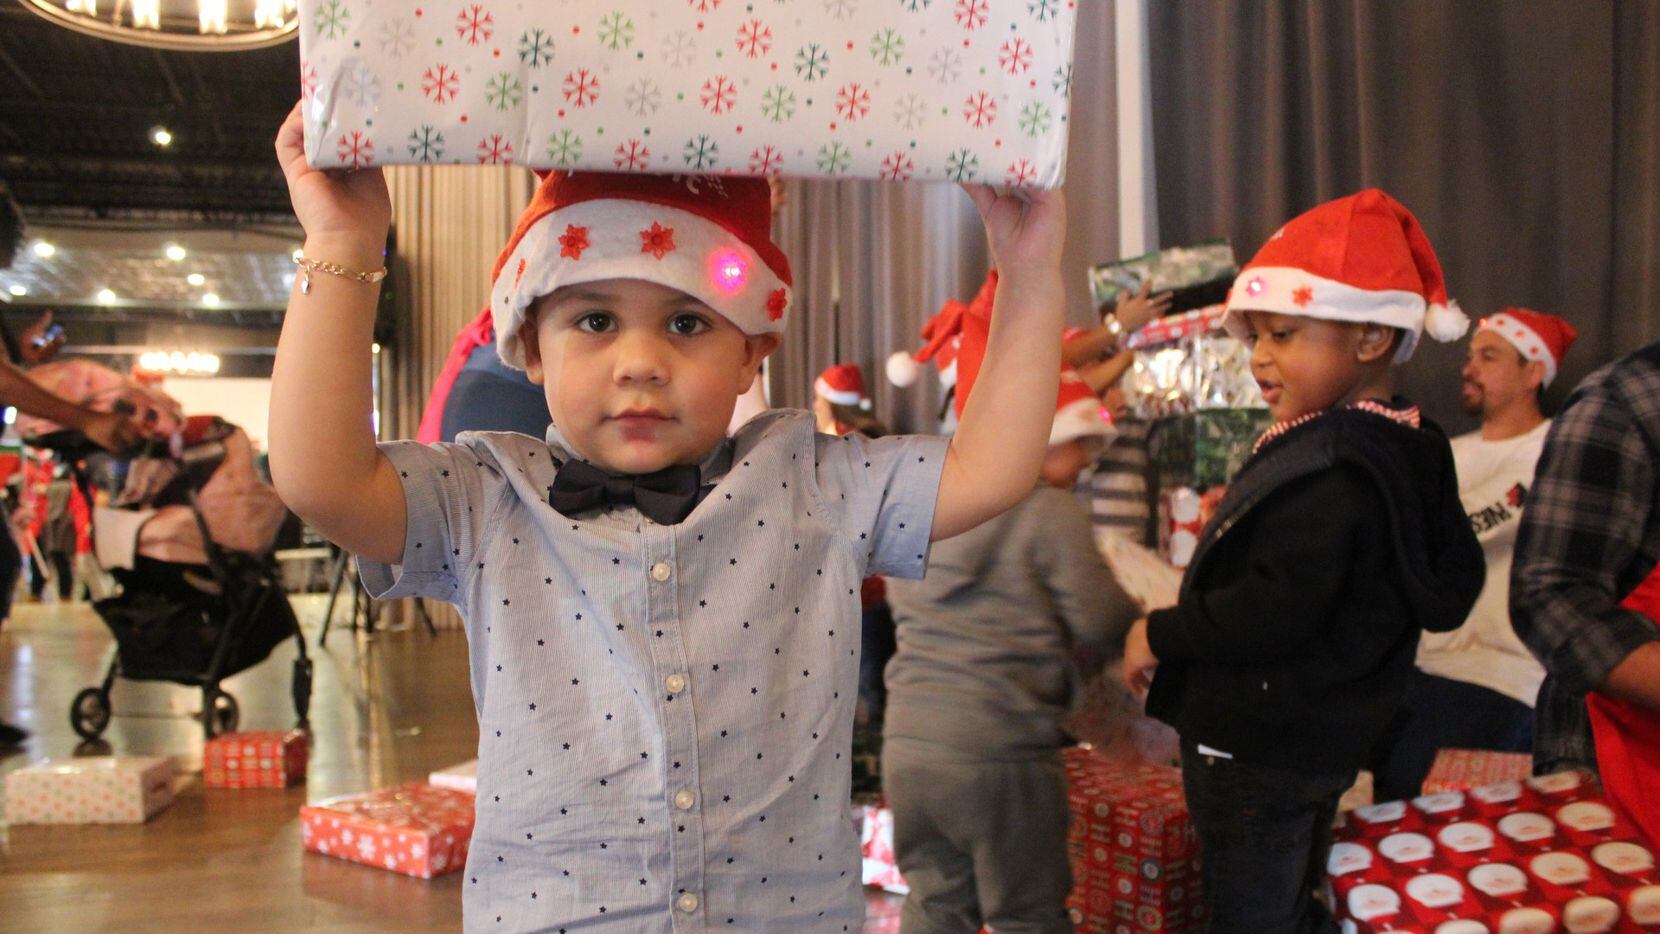 A child holds a wrapped present over his head during a holiday toy drive.